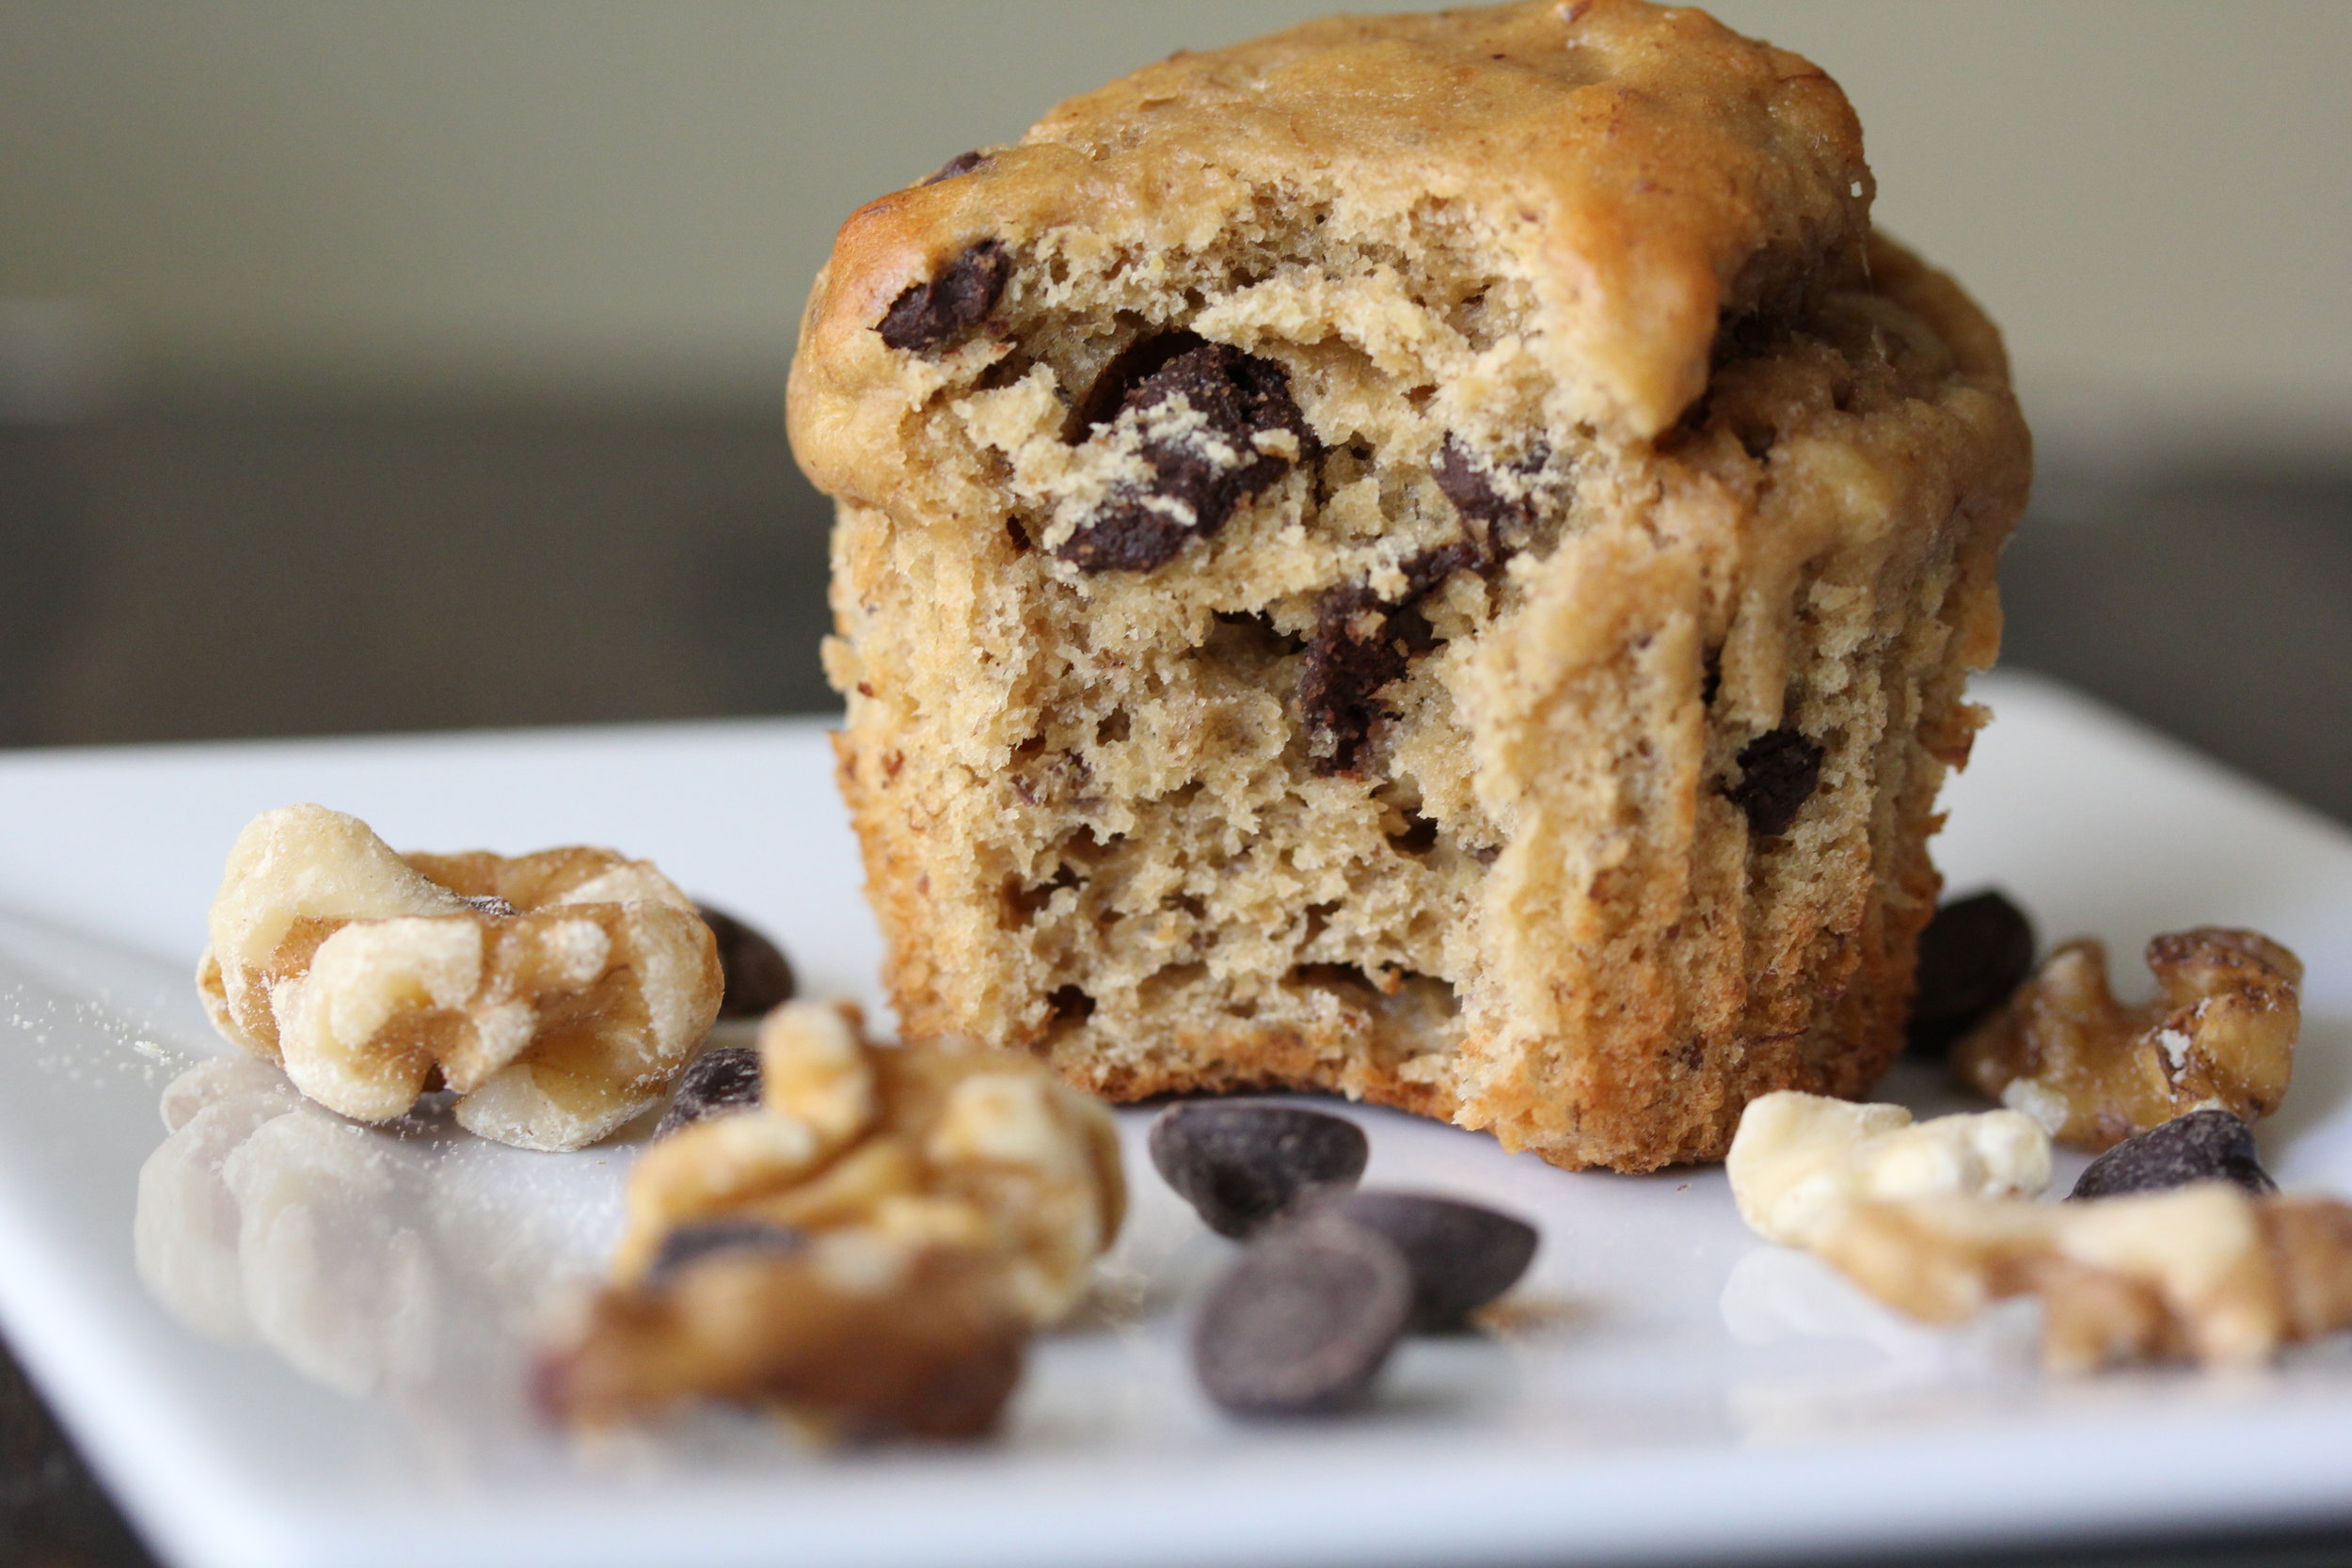 These are some of my favorite muffins to have on hand for a pre- or post-workout snack!